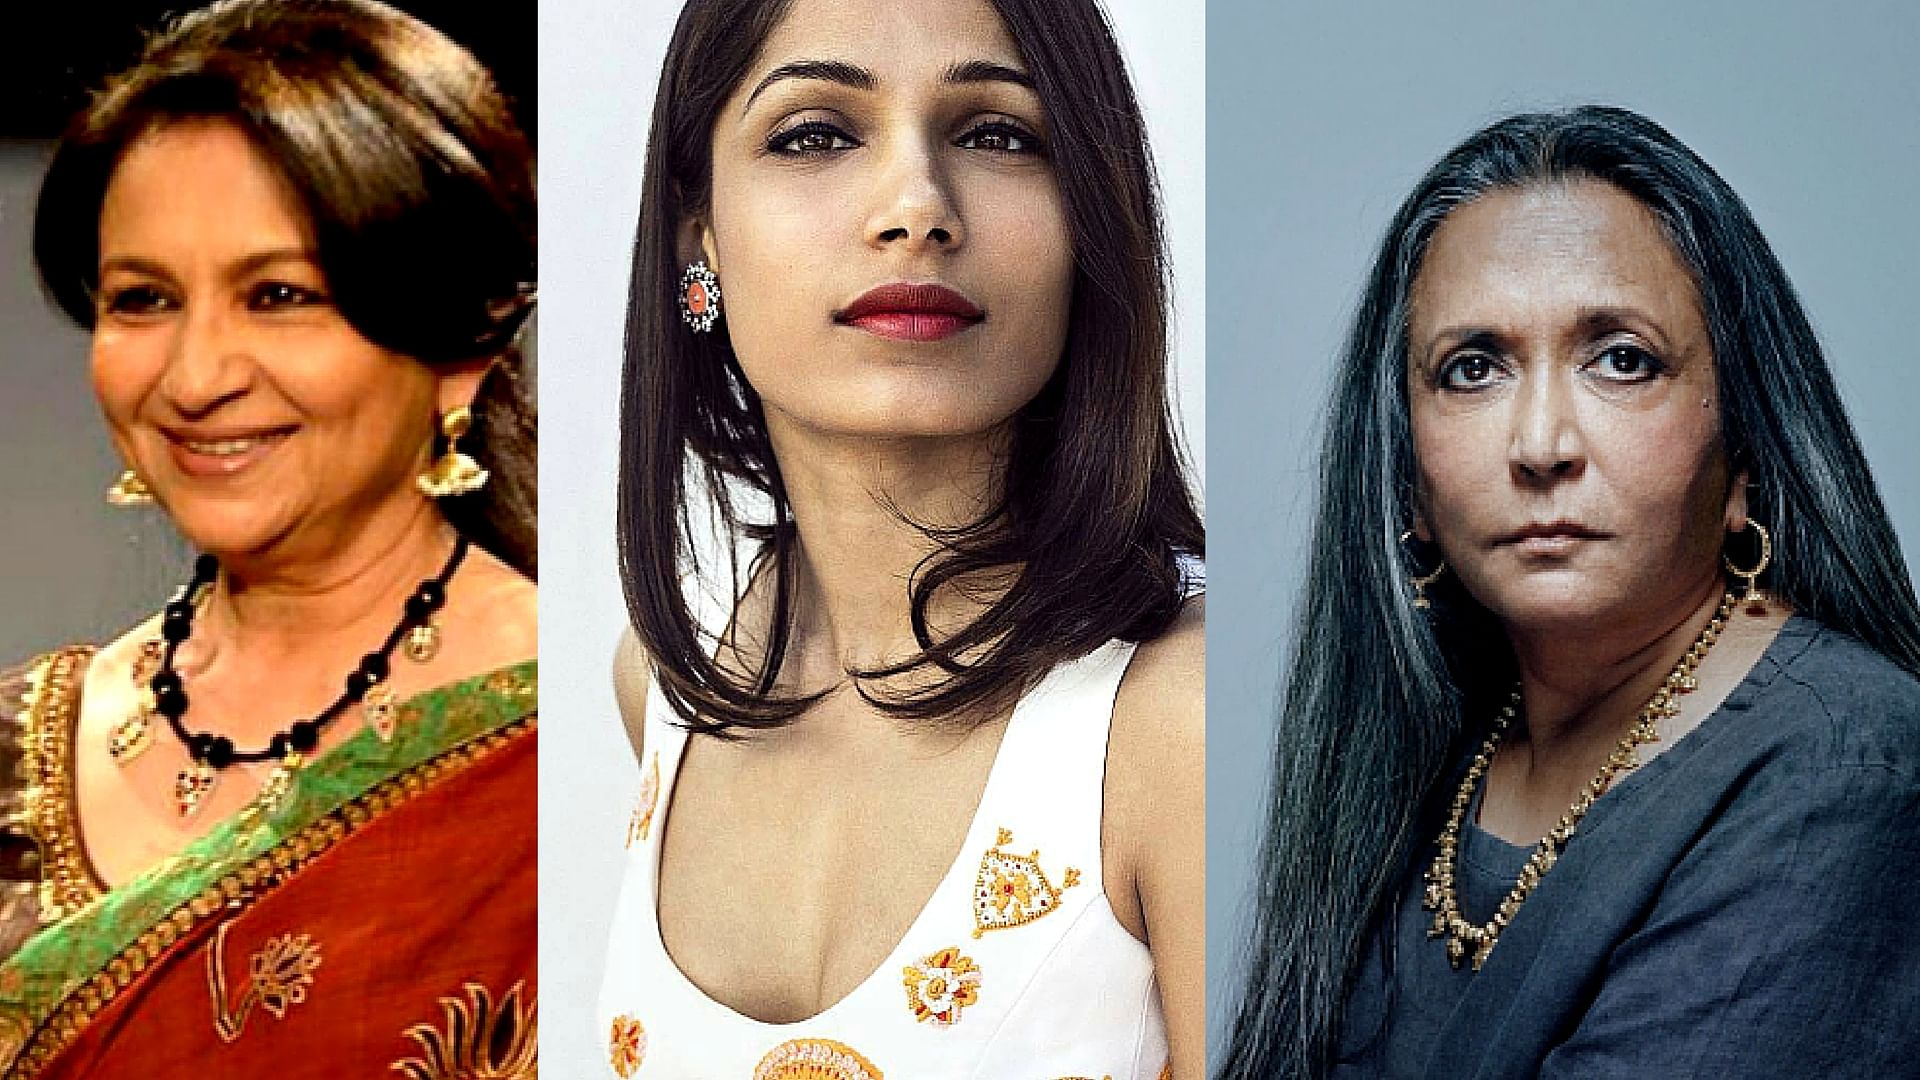 Sharmila Tagore, Freida  Pinto and Deepa Mehta have  been chosen to be members  of the Oscar Academy (Photo courtesy: Instagram/ freidapinto, Twitter/ <a href="https://twitter.com/search?f=images&amp;vertical=default&amp;q=deepa%20mehta&amp;src=typd">@agotoronto</a>/ <a href="https://twitter.com/search?f=images&amp;vertical=default&amp;q=sharmila%20tagore&amp;src=tyah">@charka_</a>)